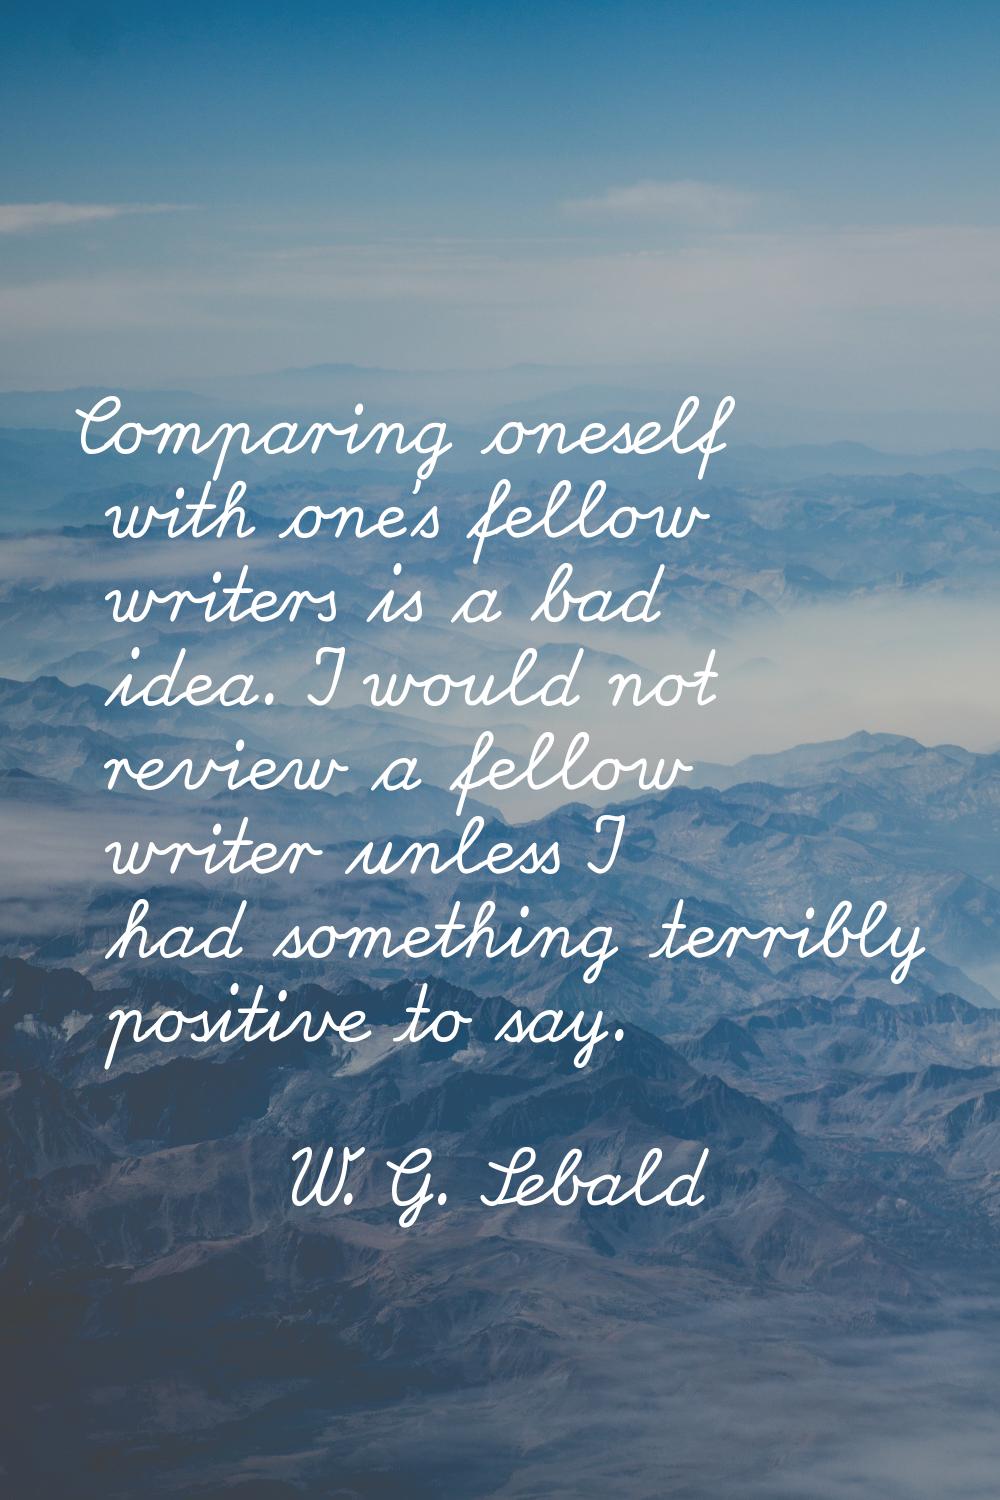 Comparing oneself with one's fellow writers is a bad idea. I would not review a fellow writer unles